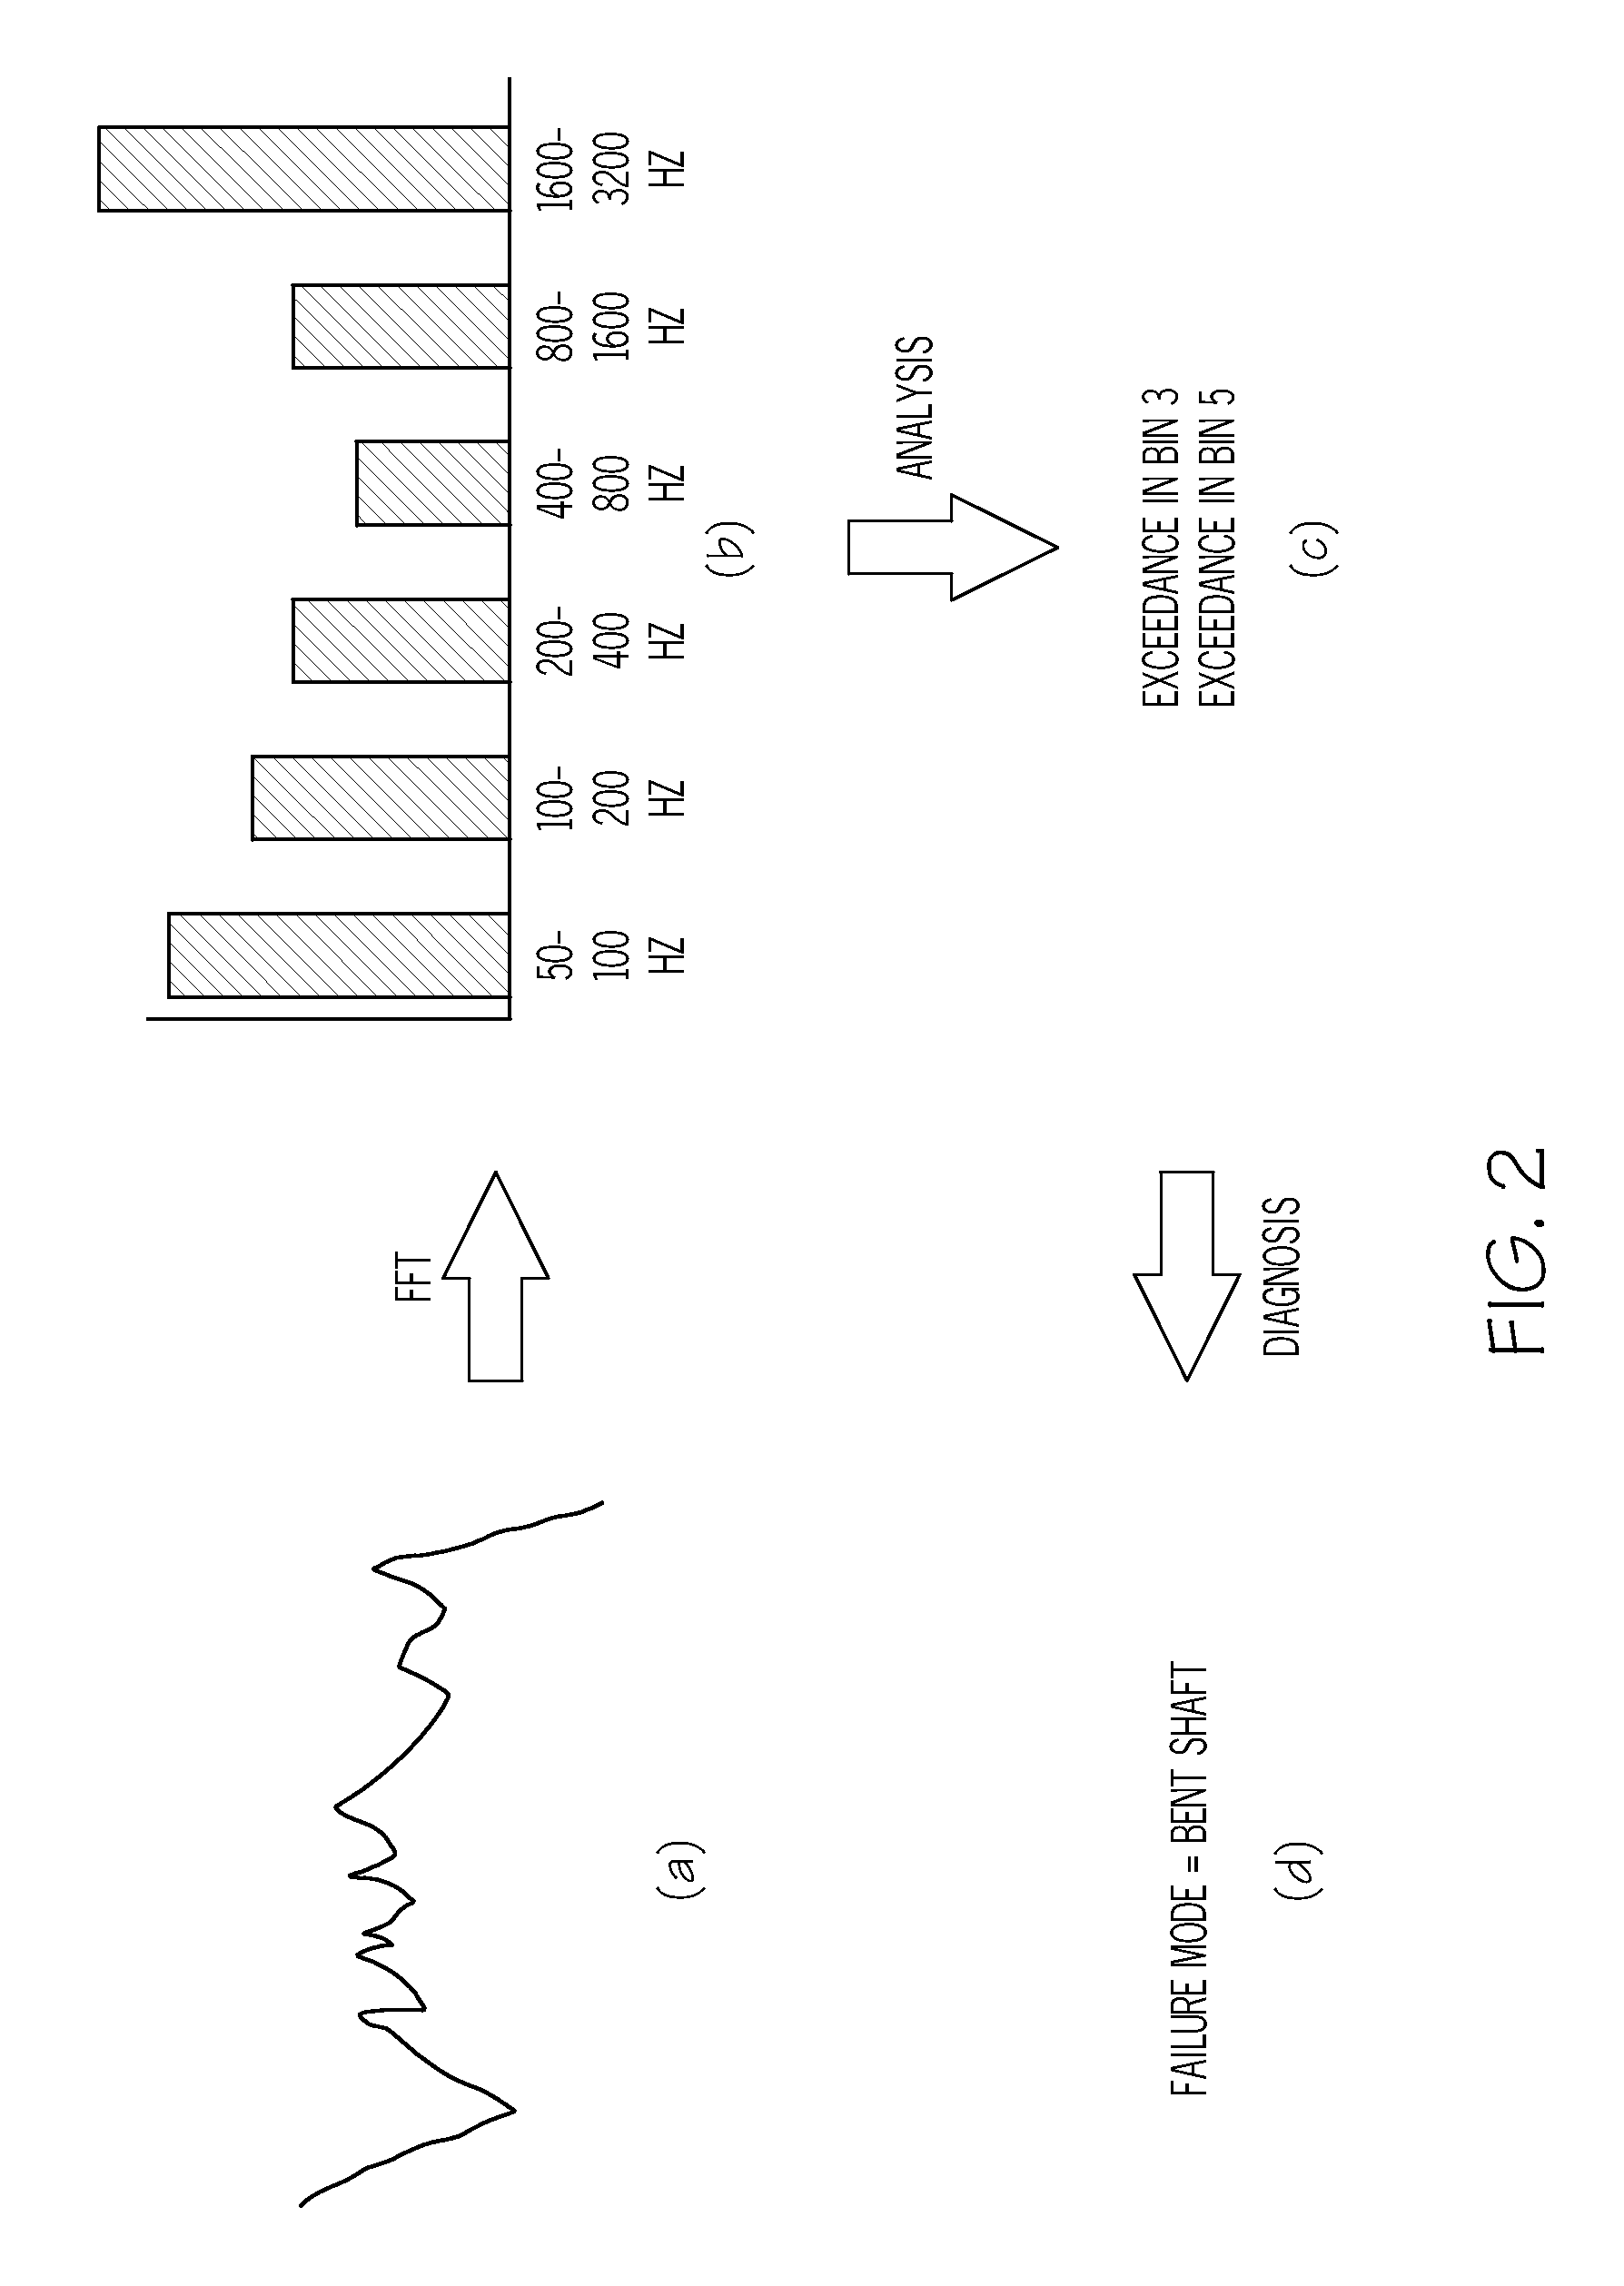 Vehicle system monitoring and communications architecture